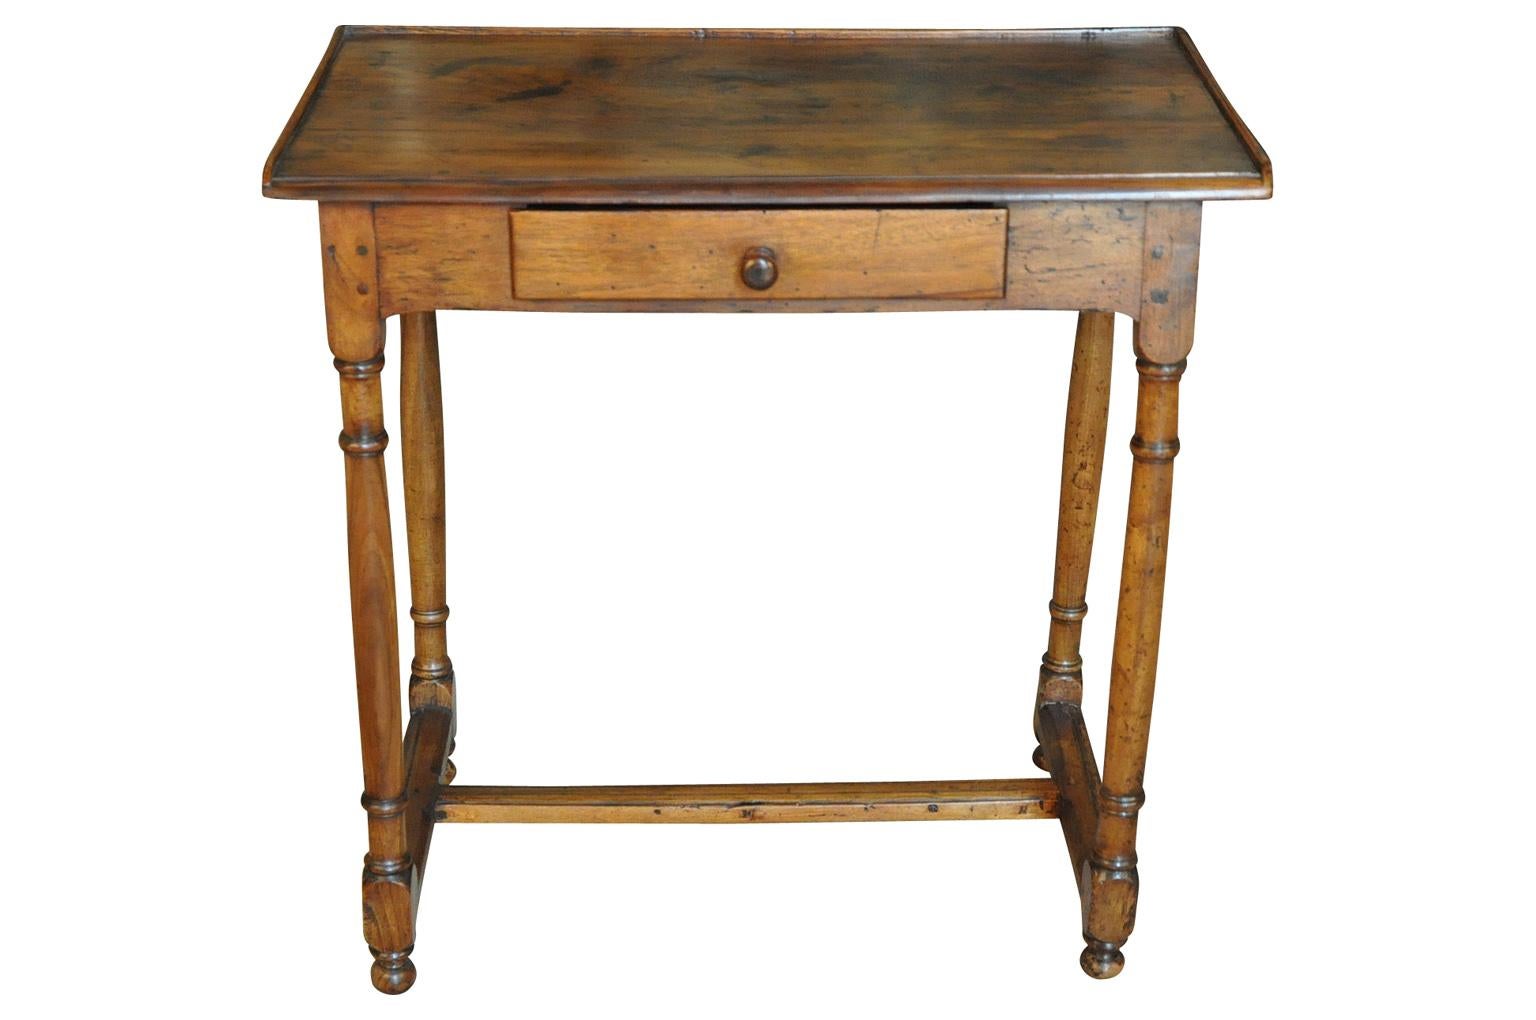 A very charming mid-19th century side table from the Provence region of France. Handsomely constructed from beautiful walnut - terrific patina - warm and luminous.